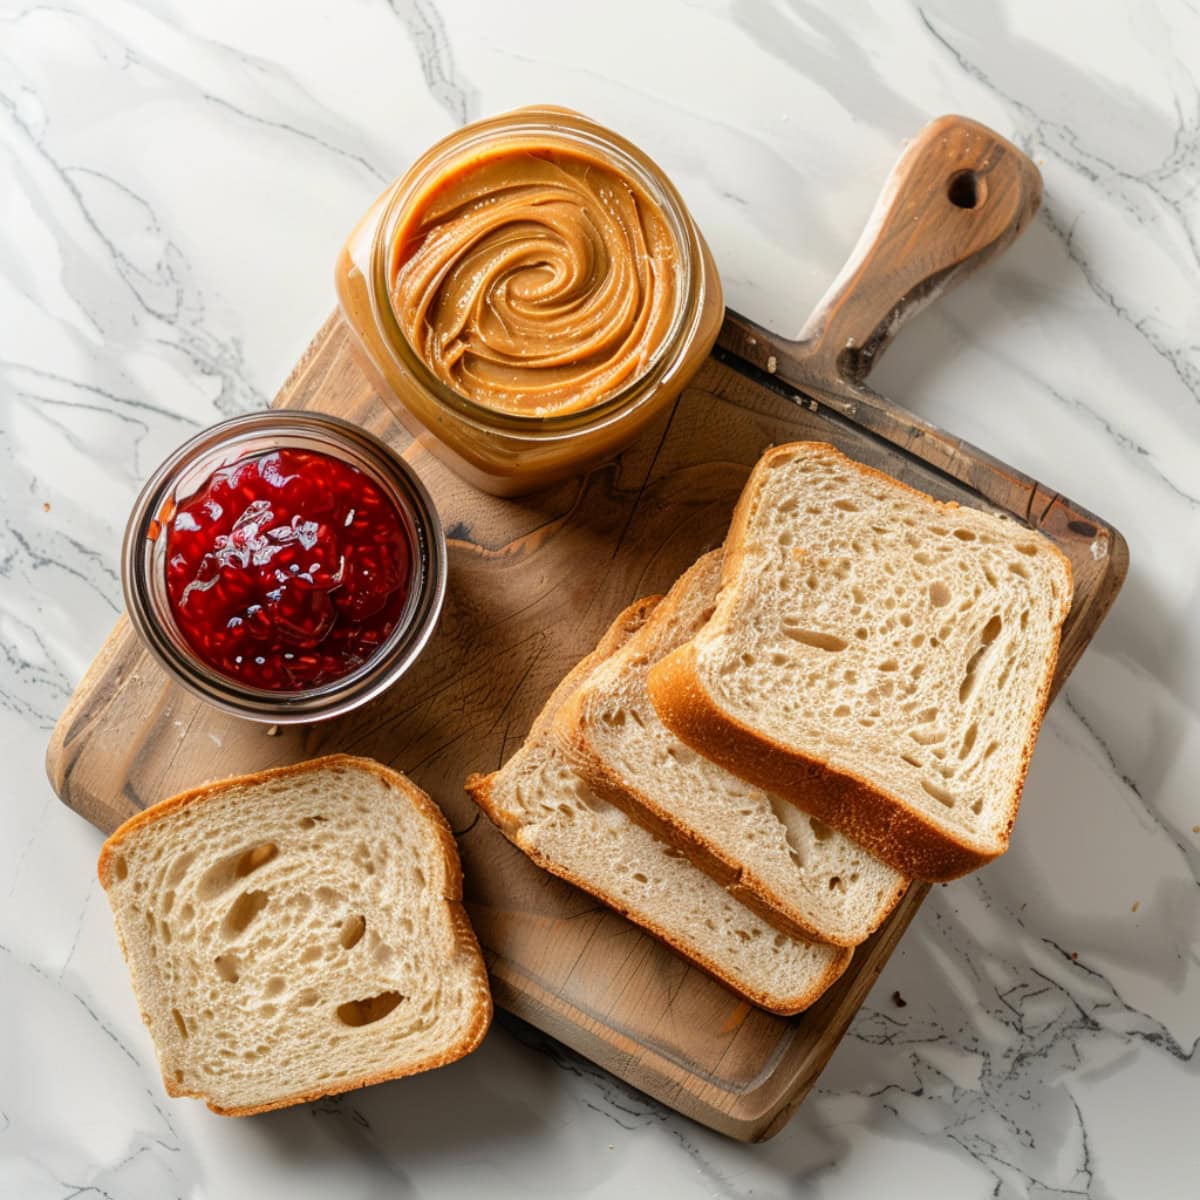 Slices of bread with bottles of peanut butter and jelly in a wooden cutting board.